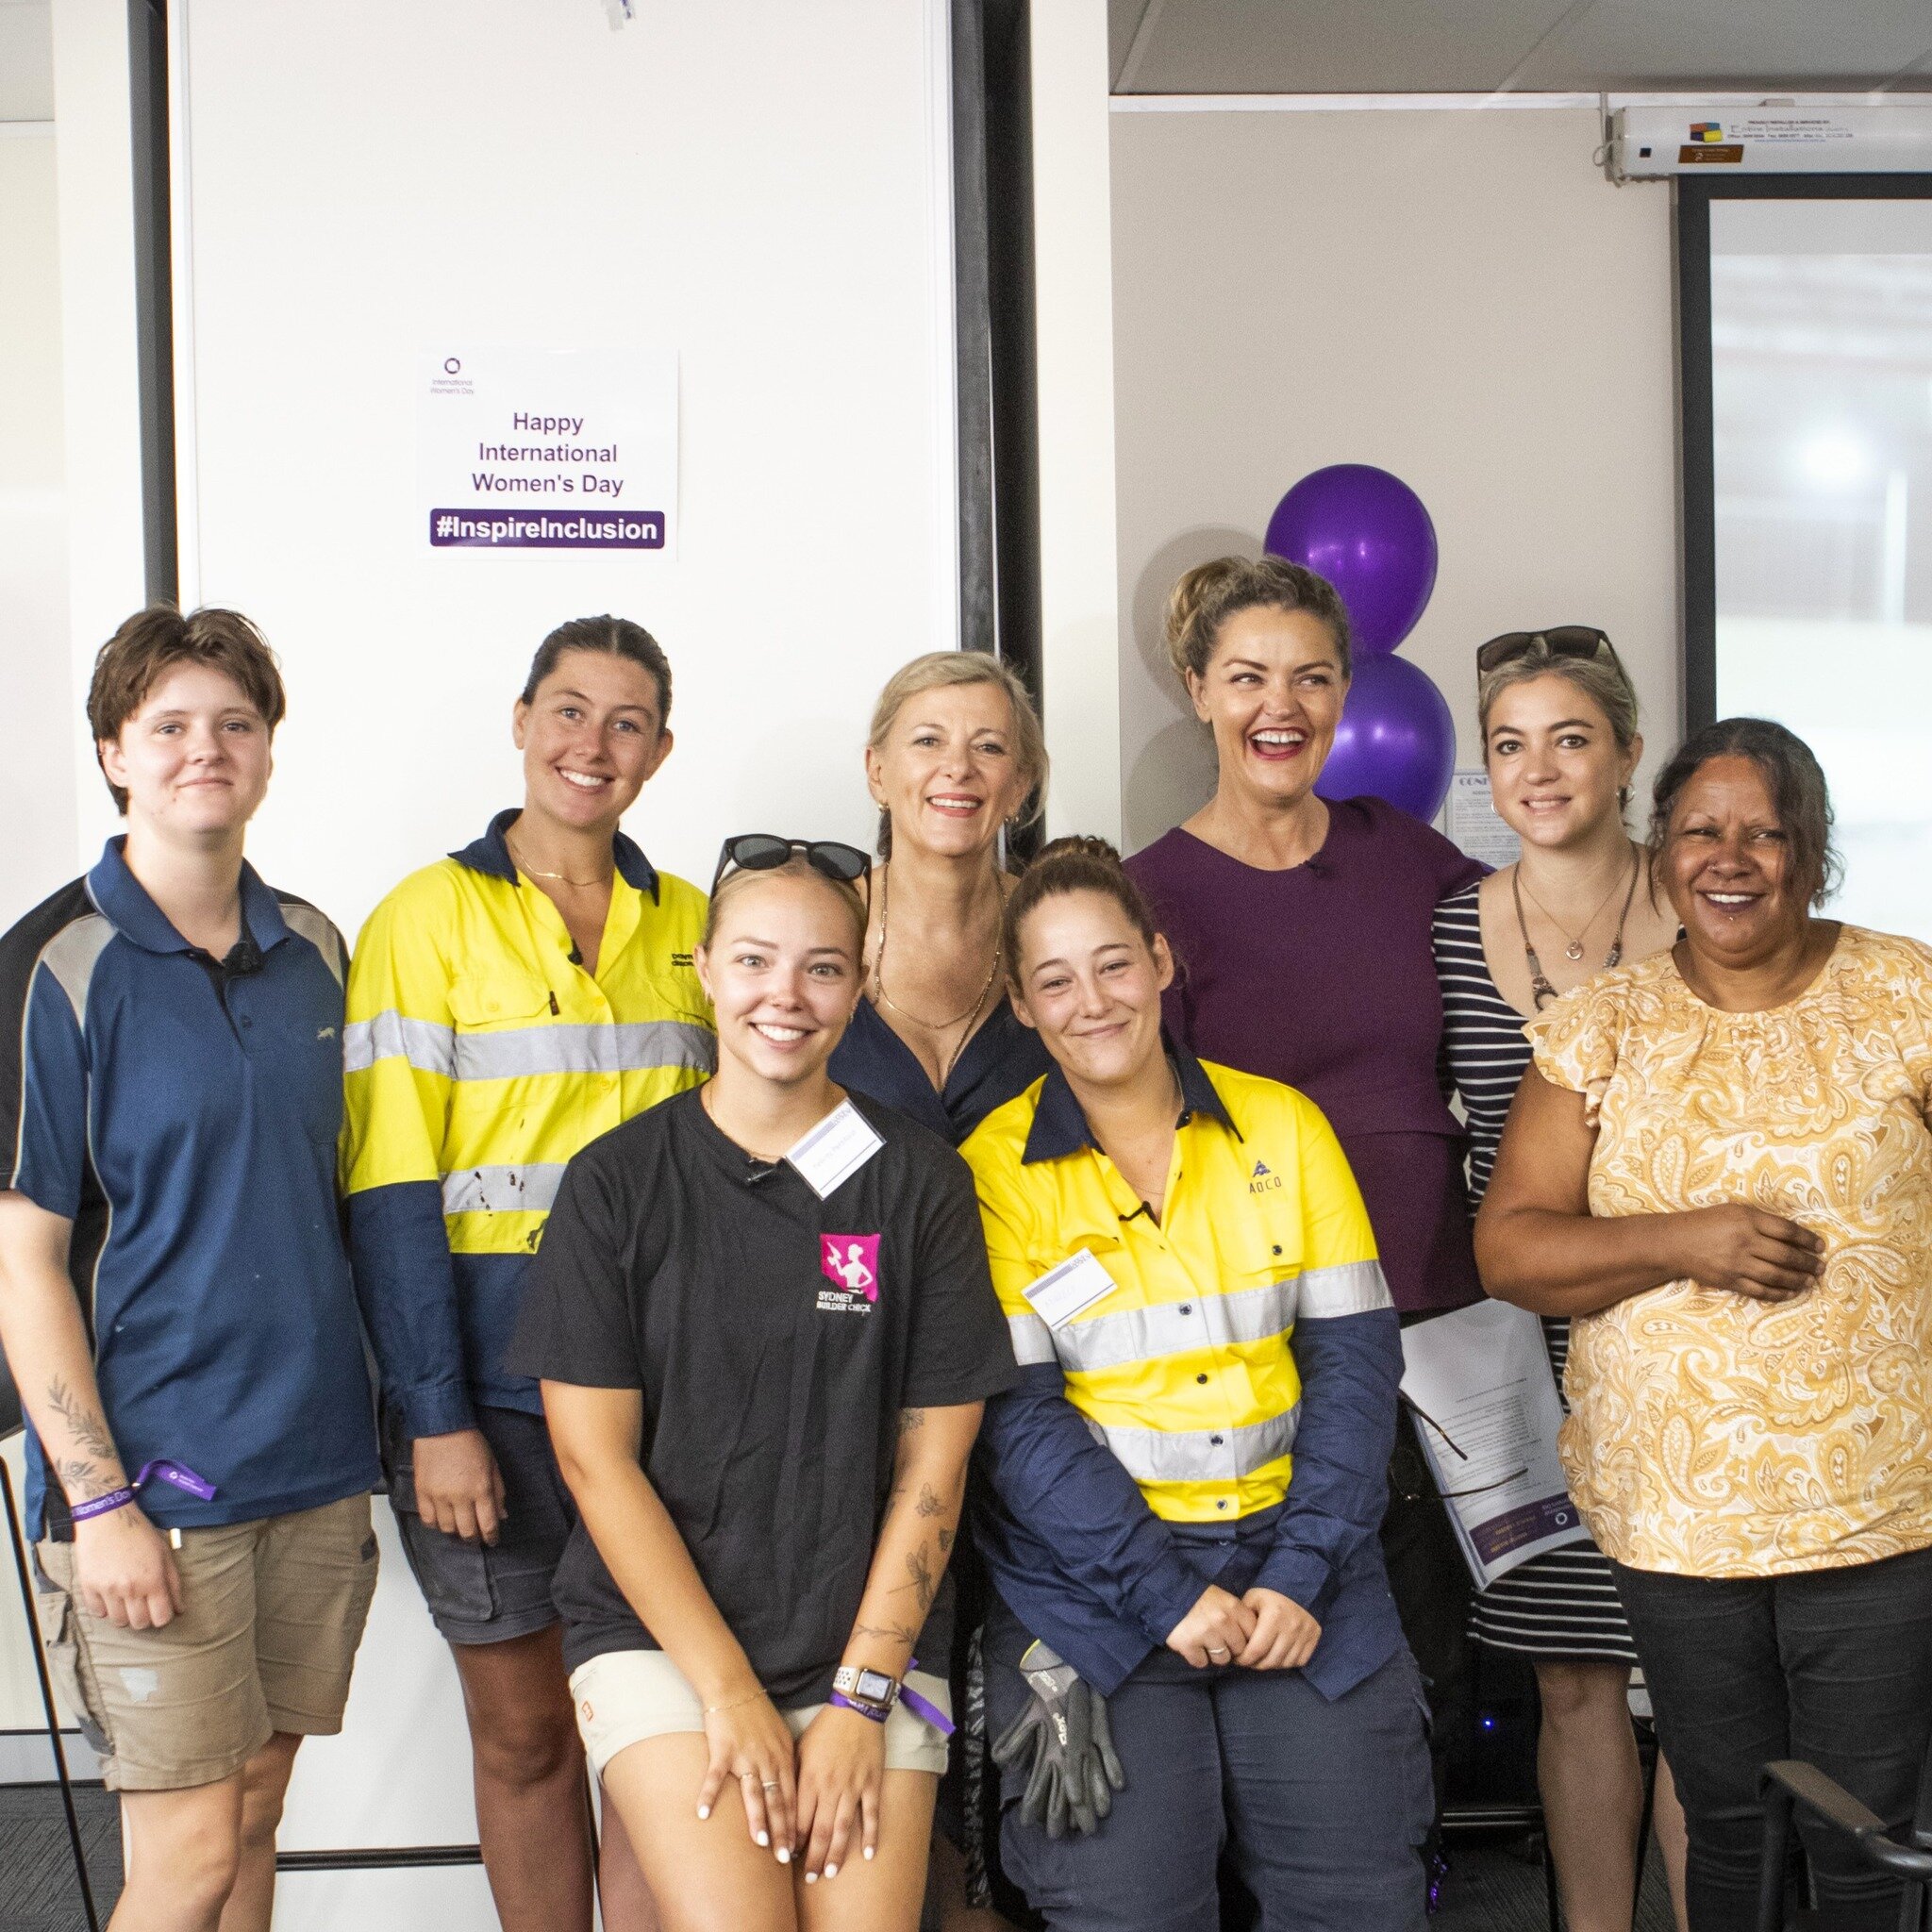 On International Women's Day, the Master Builders NSW Education and Apprenticeship team hosted a networking breakfast to celebrate women in construction. The event included a panel discussion with inspiring female leaders and apprentices in the const